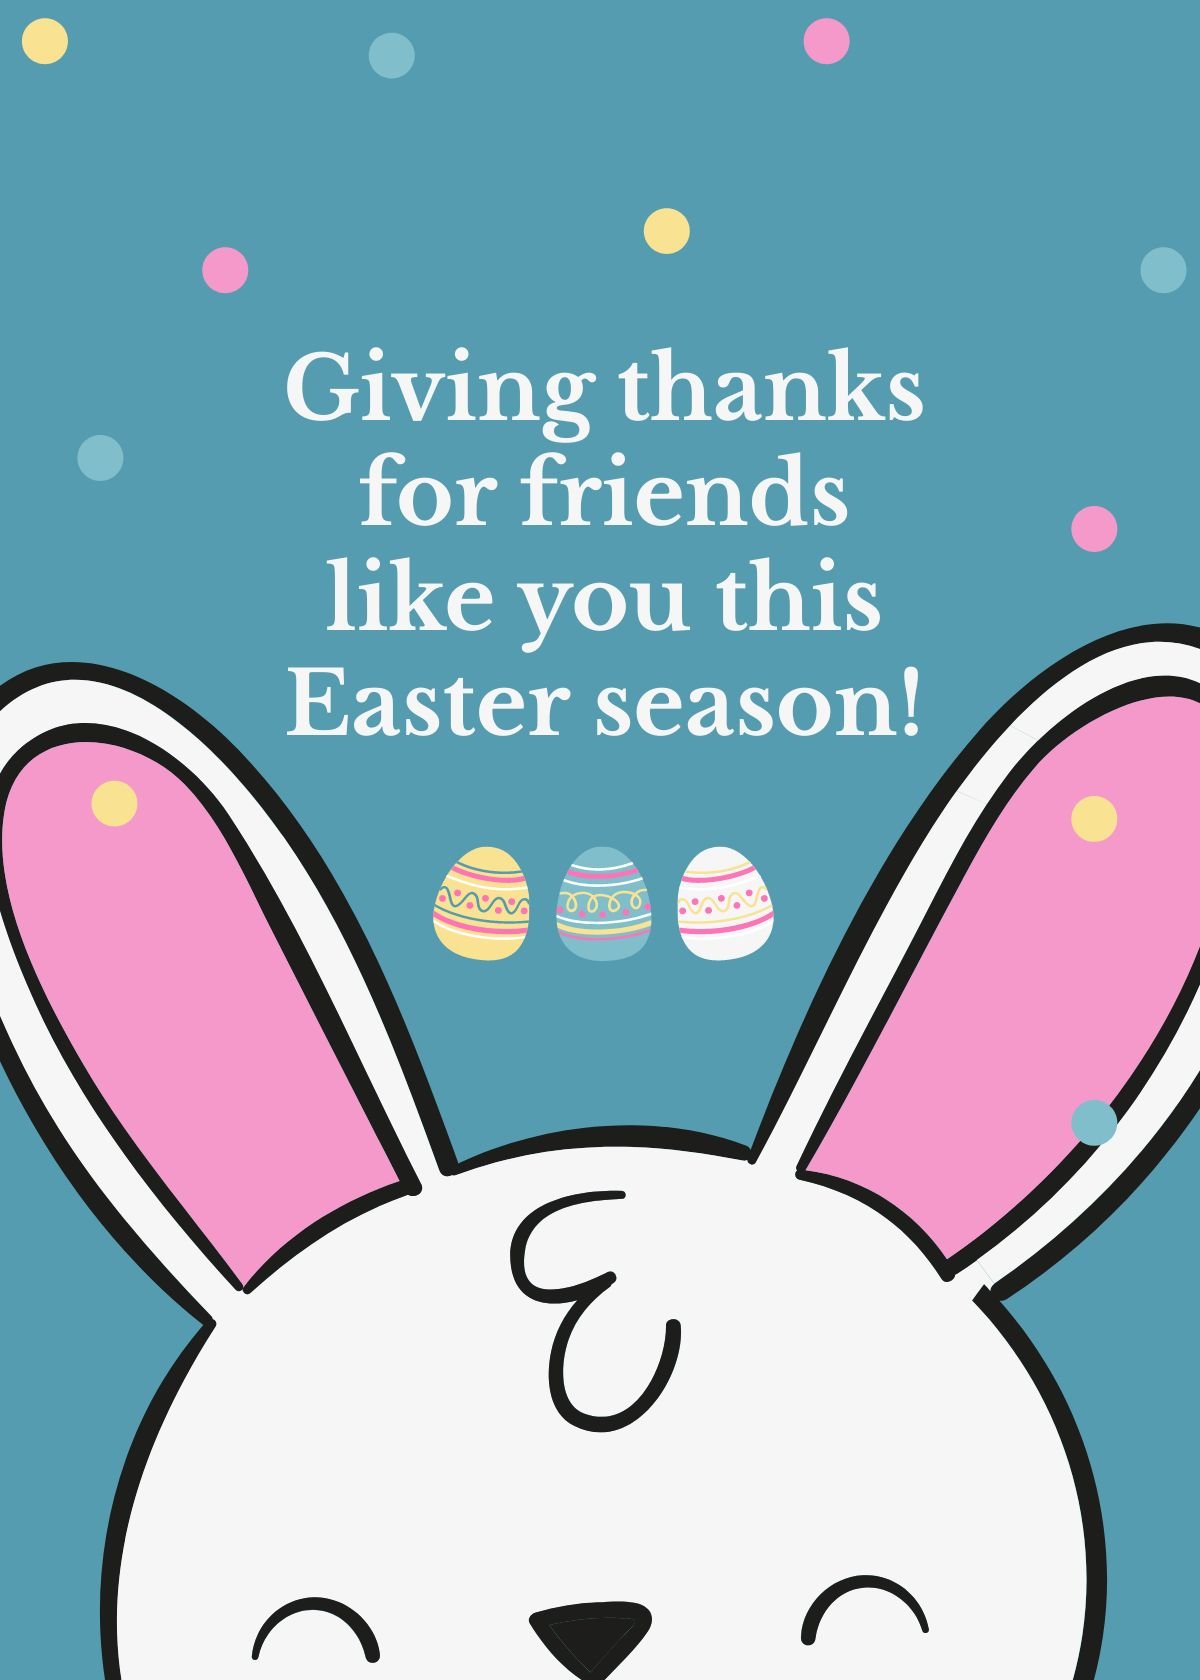 Free Easter Wishes For Friend in Word, Google Docs, Illustrator, PSD, EPS, SVG, JPG, PNG